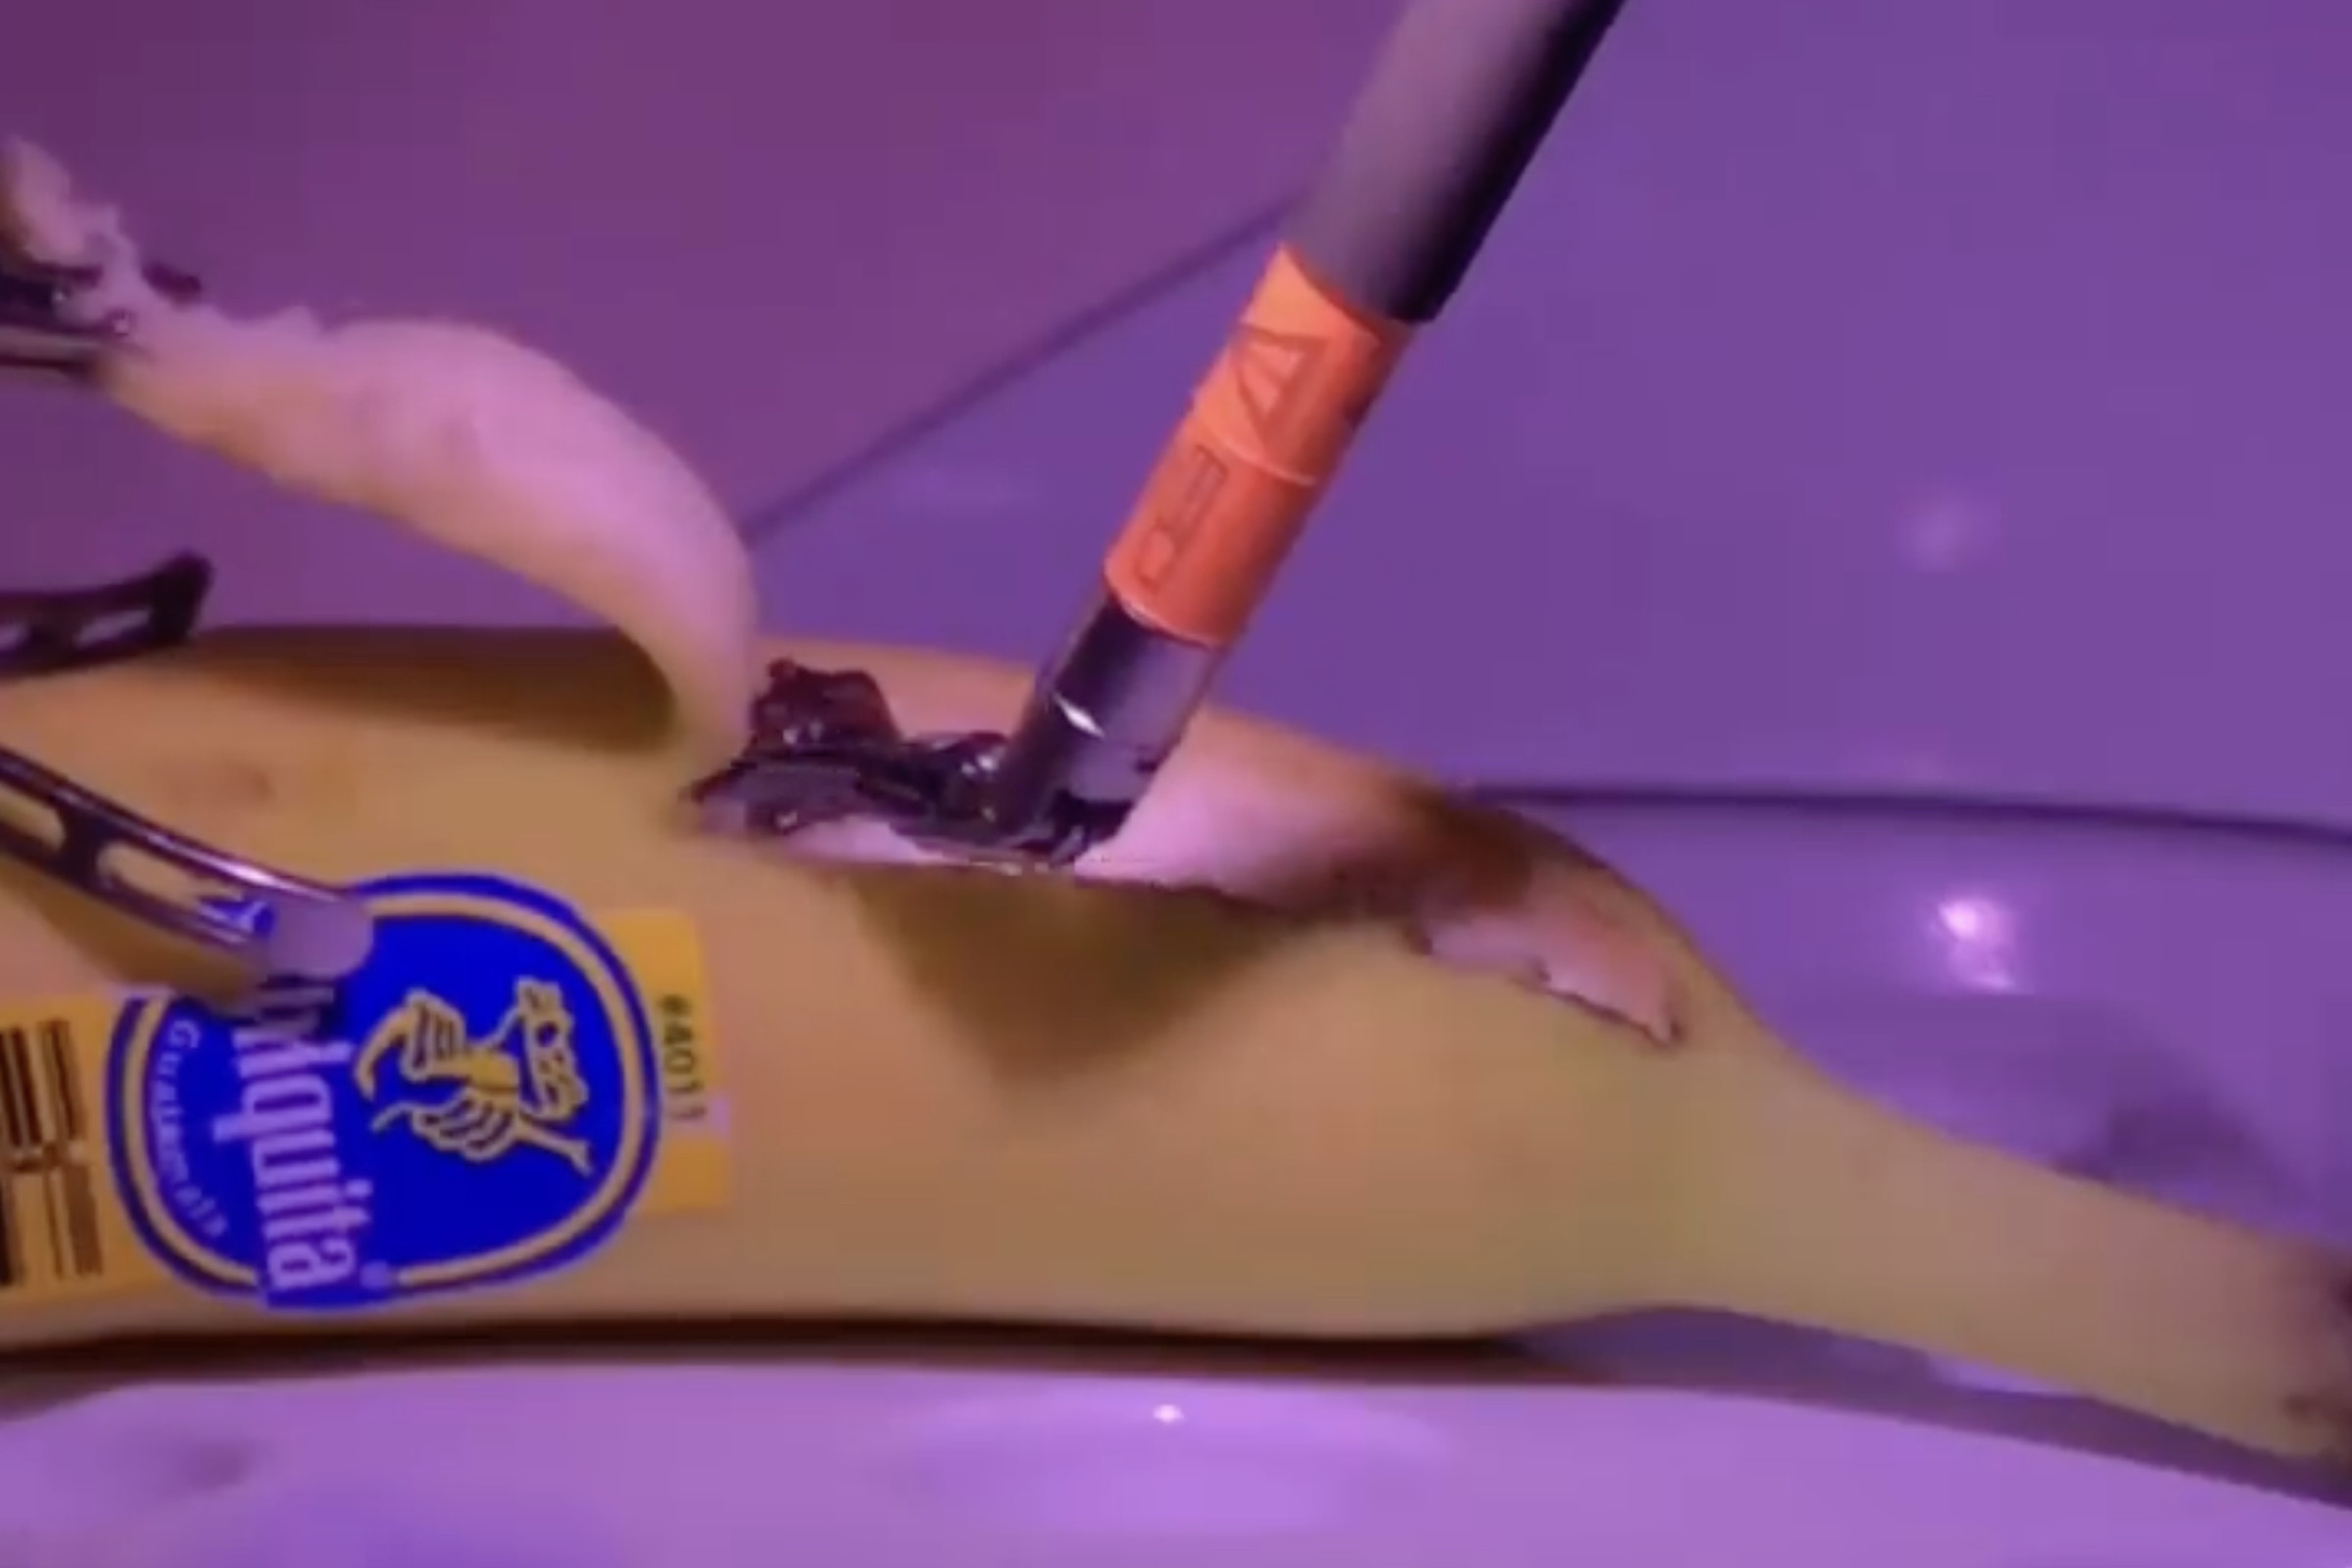 A screenshot of a banana being operated by a Da Vinci Xi robot located in Los Angeles.